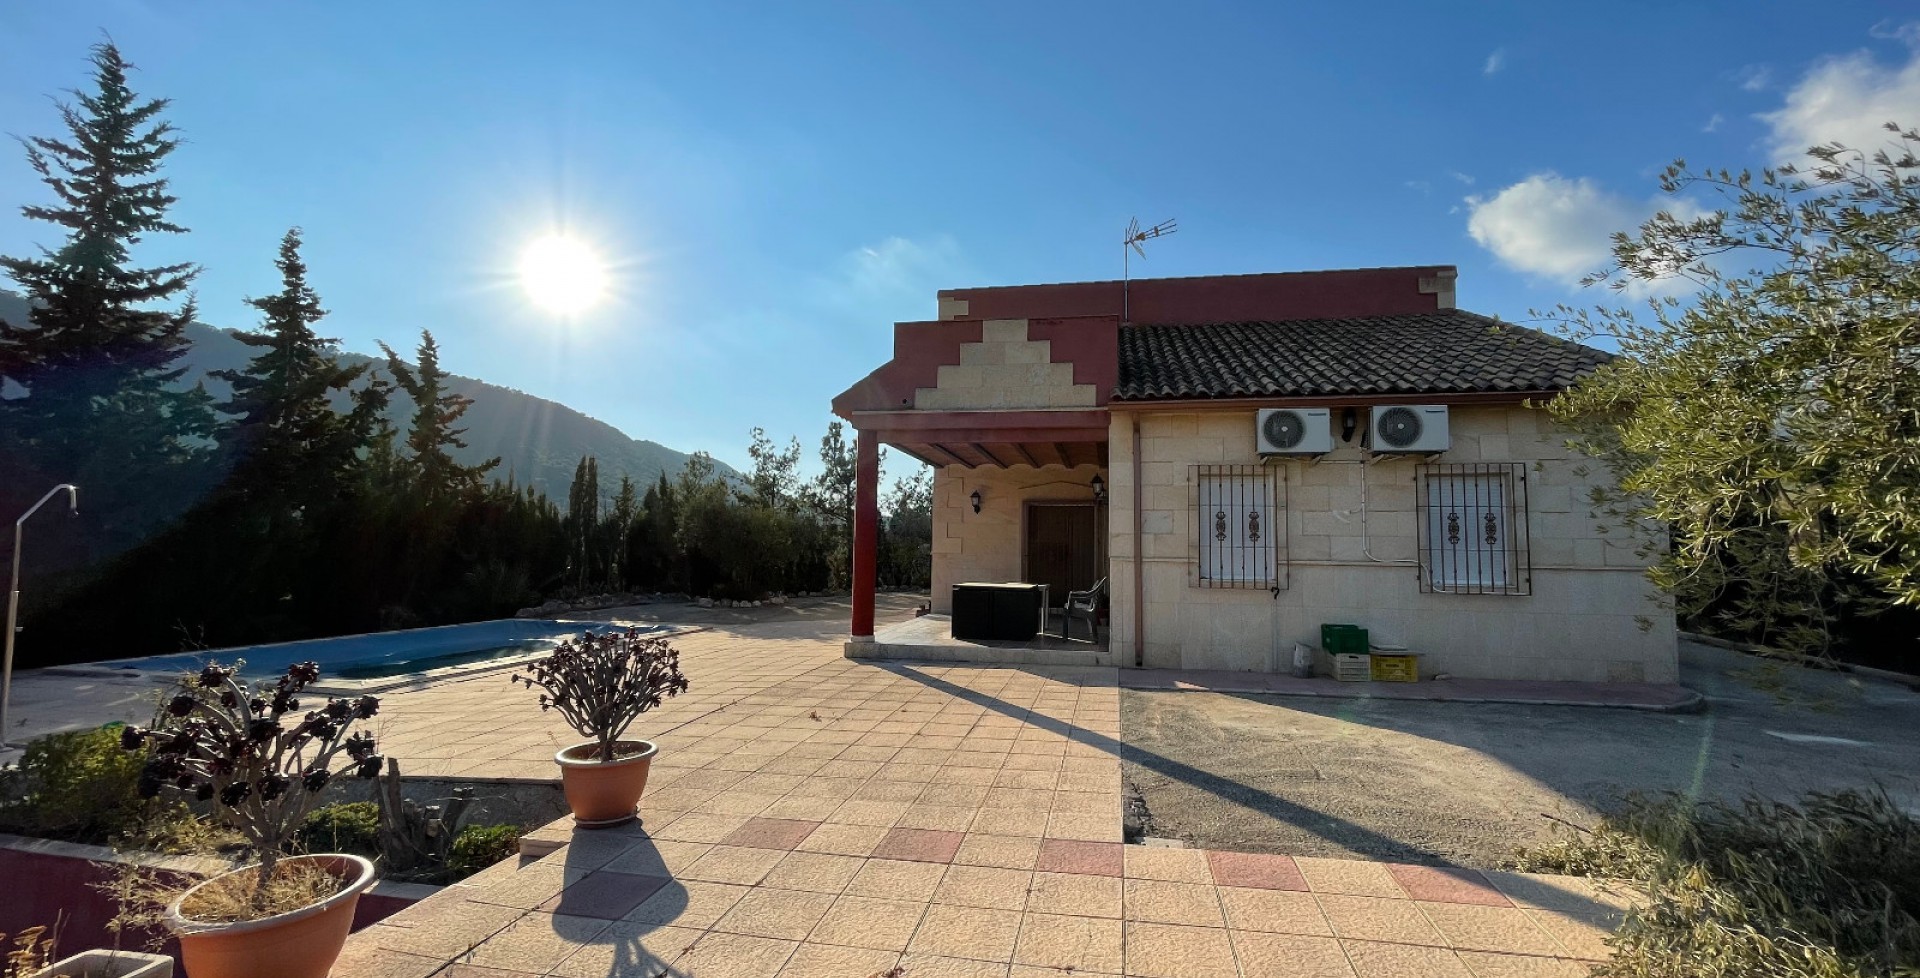 Beautiful detached country house with amazing swimming pool, Ojós, Murcia, Spain